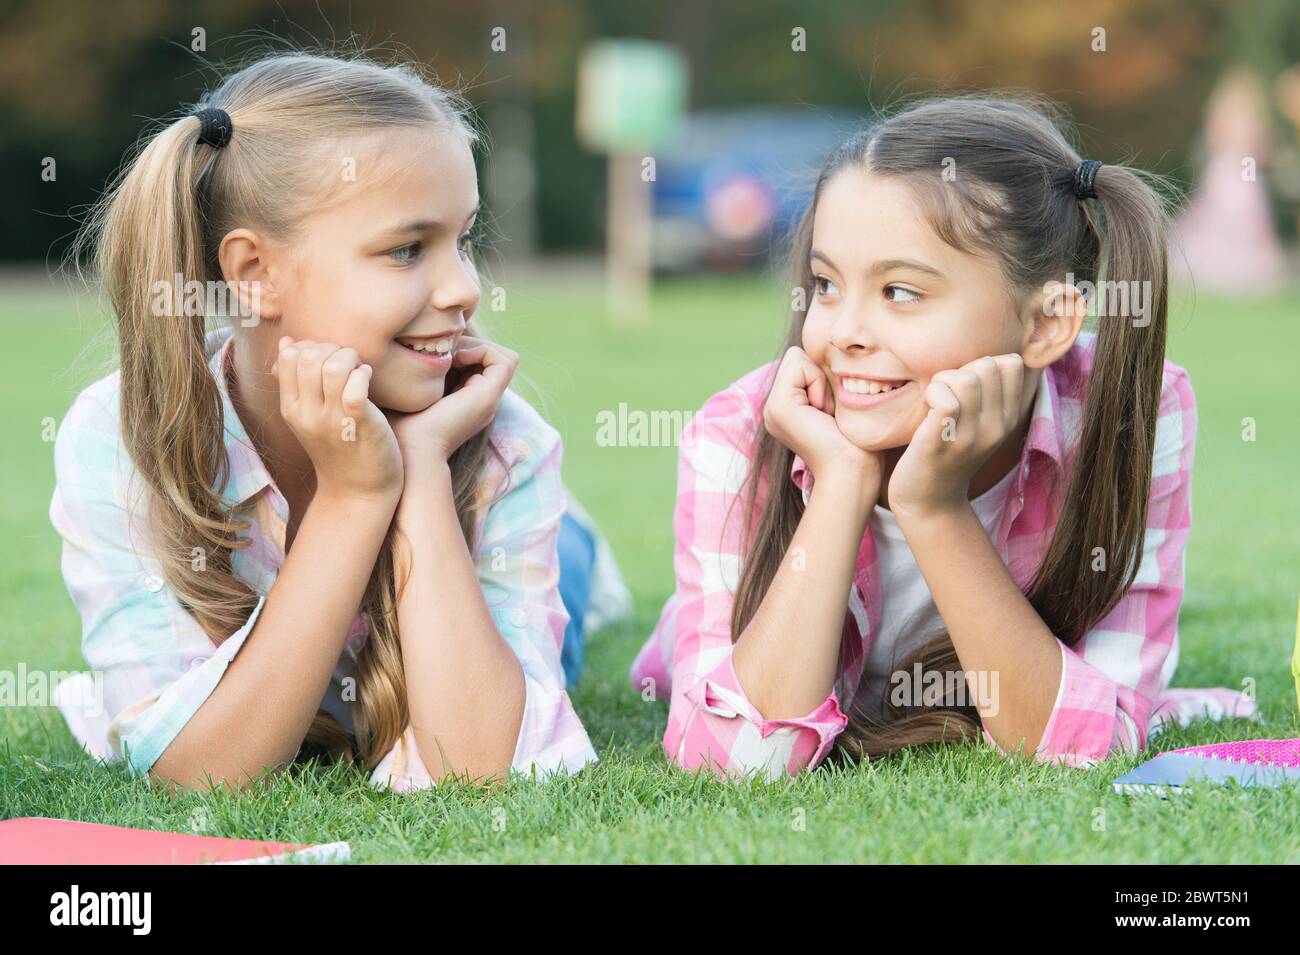 Youre awesome just like me. Happy children relax on green grass. Beauty look of small children. Little children enjoy happy childhood. International childrens day. Having friends is good for children. Stock Photo